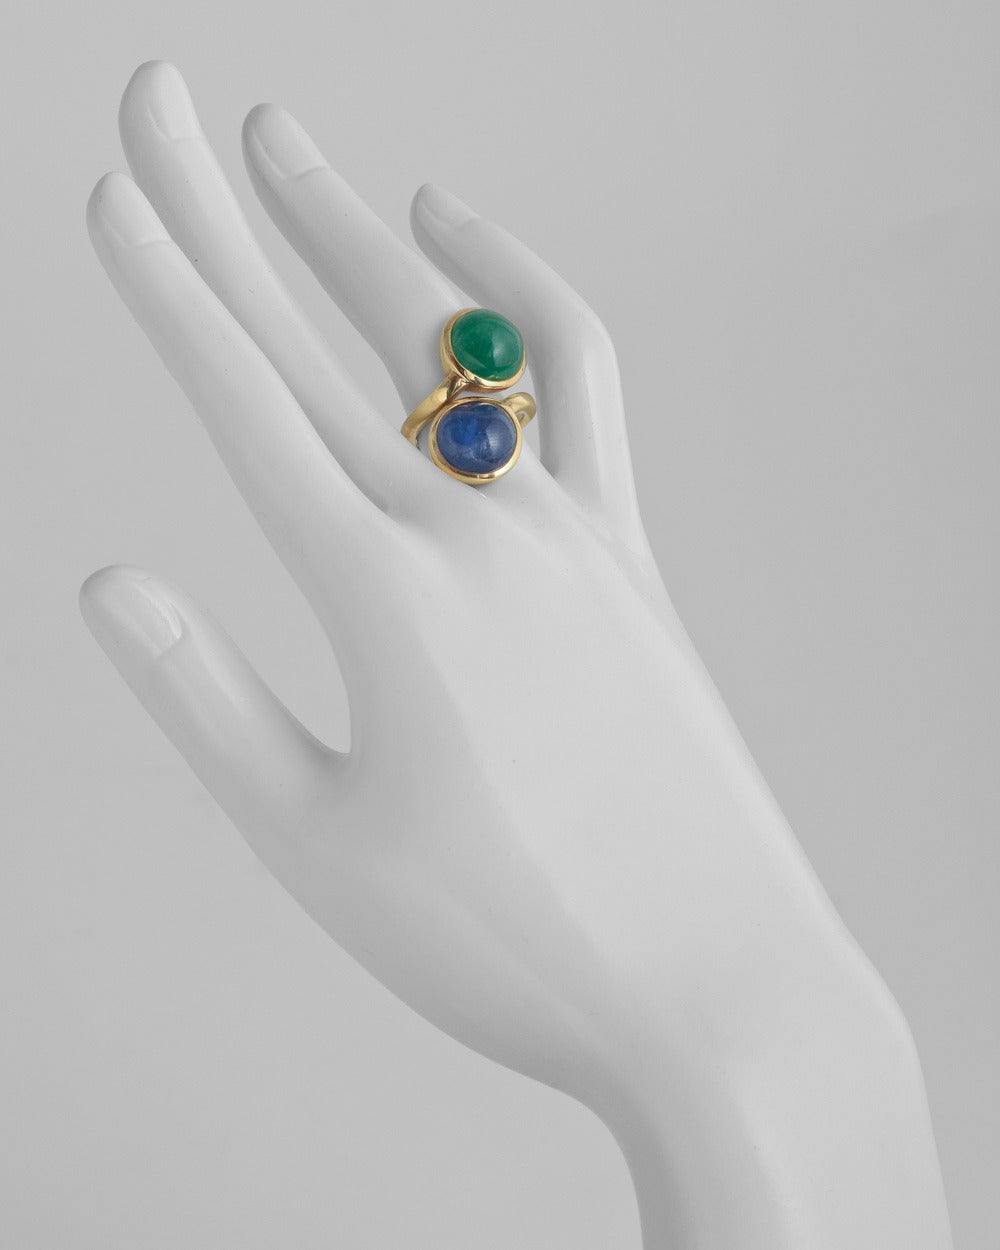 Double cabochon bypass ring, showcasing a cabochon-cut emerald and sapphire weighing approximately 7.66 carats and 8.88 carats, respectively, either gemstone measuring approximately 12mm in diameter from the top, mounted in 18k yellow gold, circa